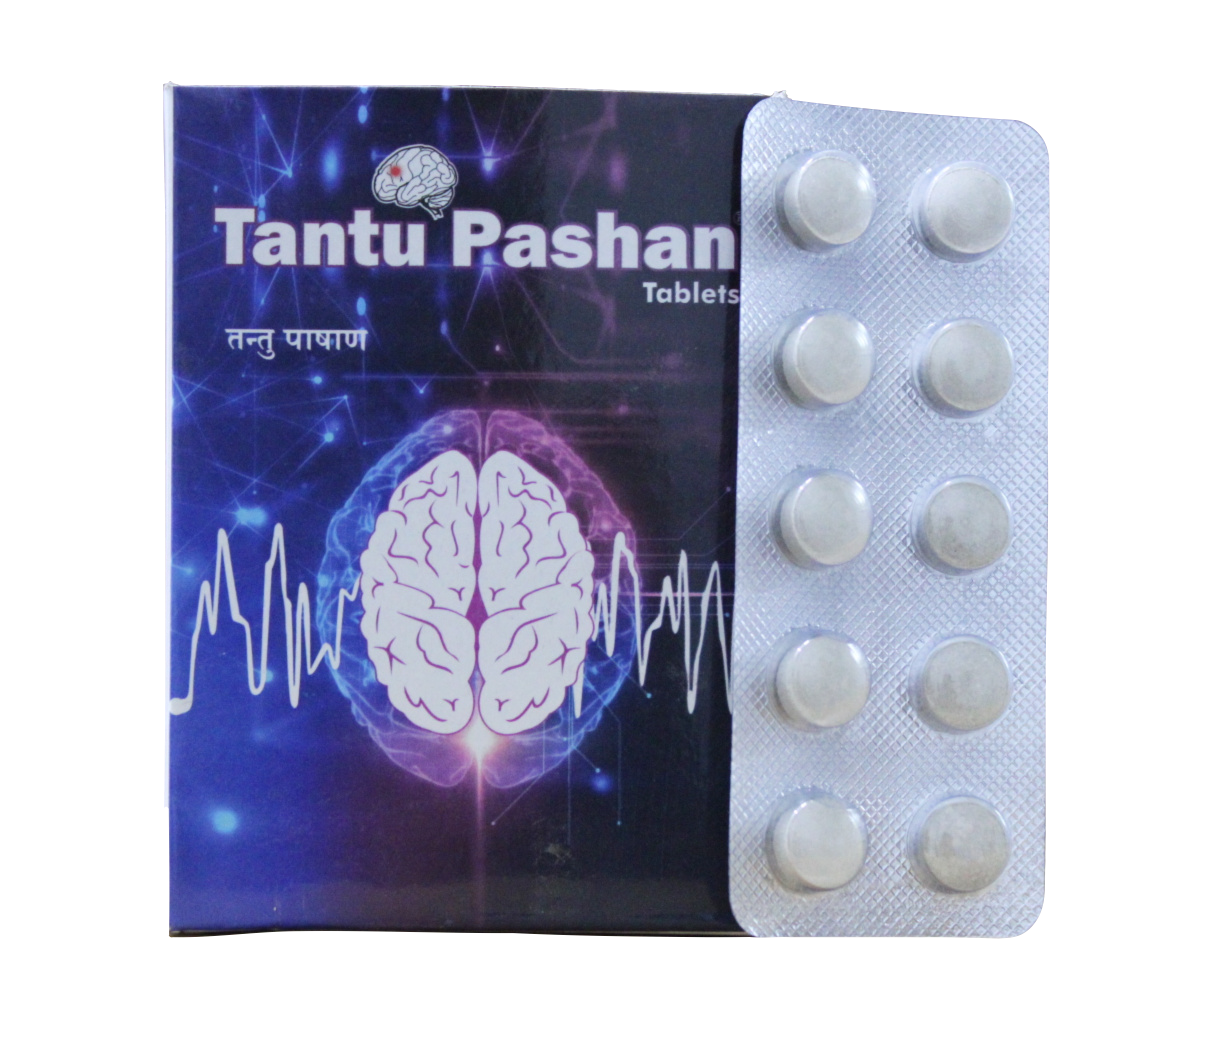 Shop Tantupashan tablets - 10tablets at price 45.00 from Sagar Online - Ayush Care